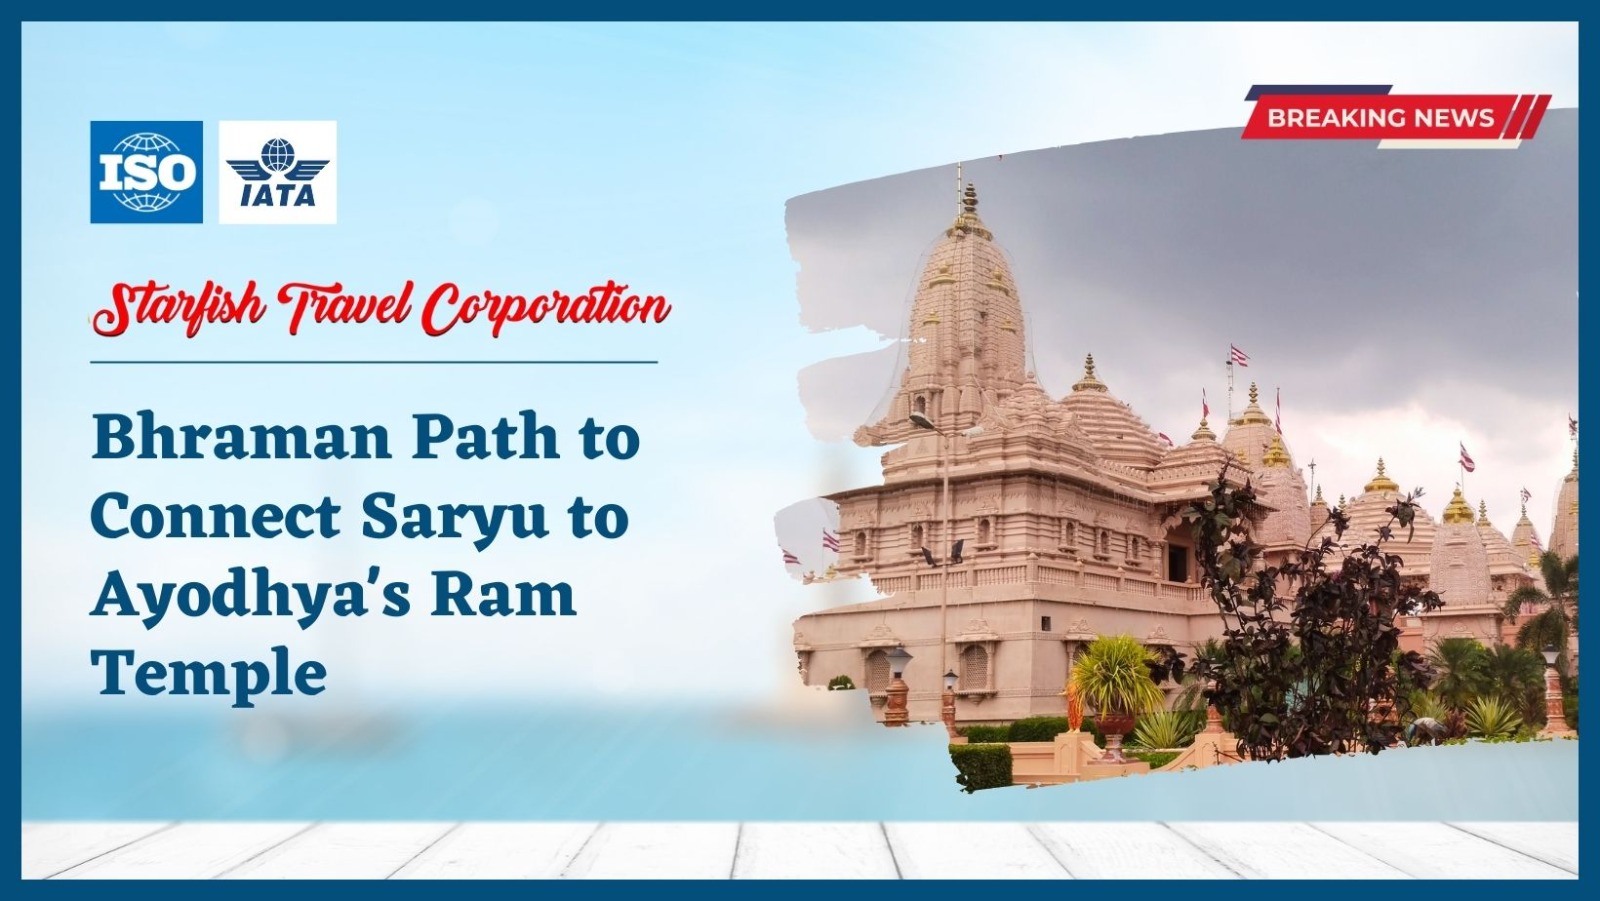 Bhraman Path to Connect Saryu to Ayodhya’s Ram Temple